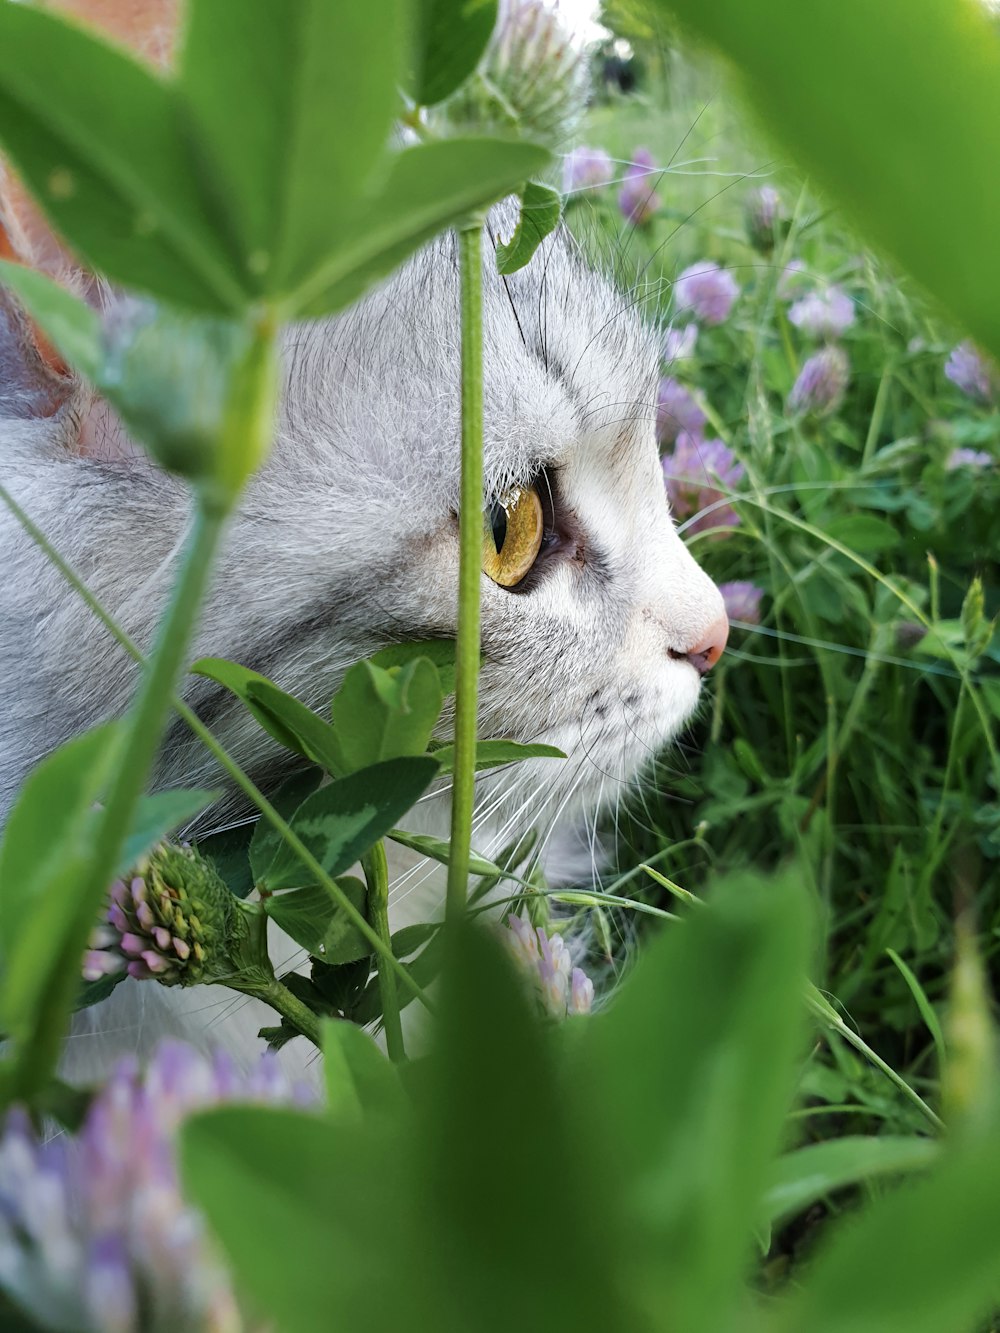 white and gray cat on green grass during daytime